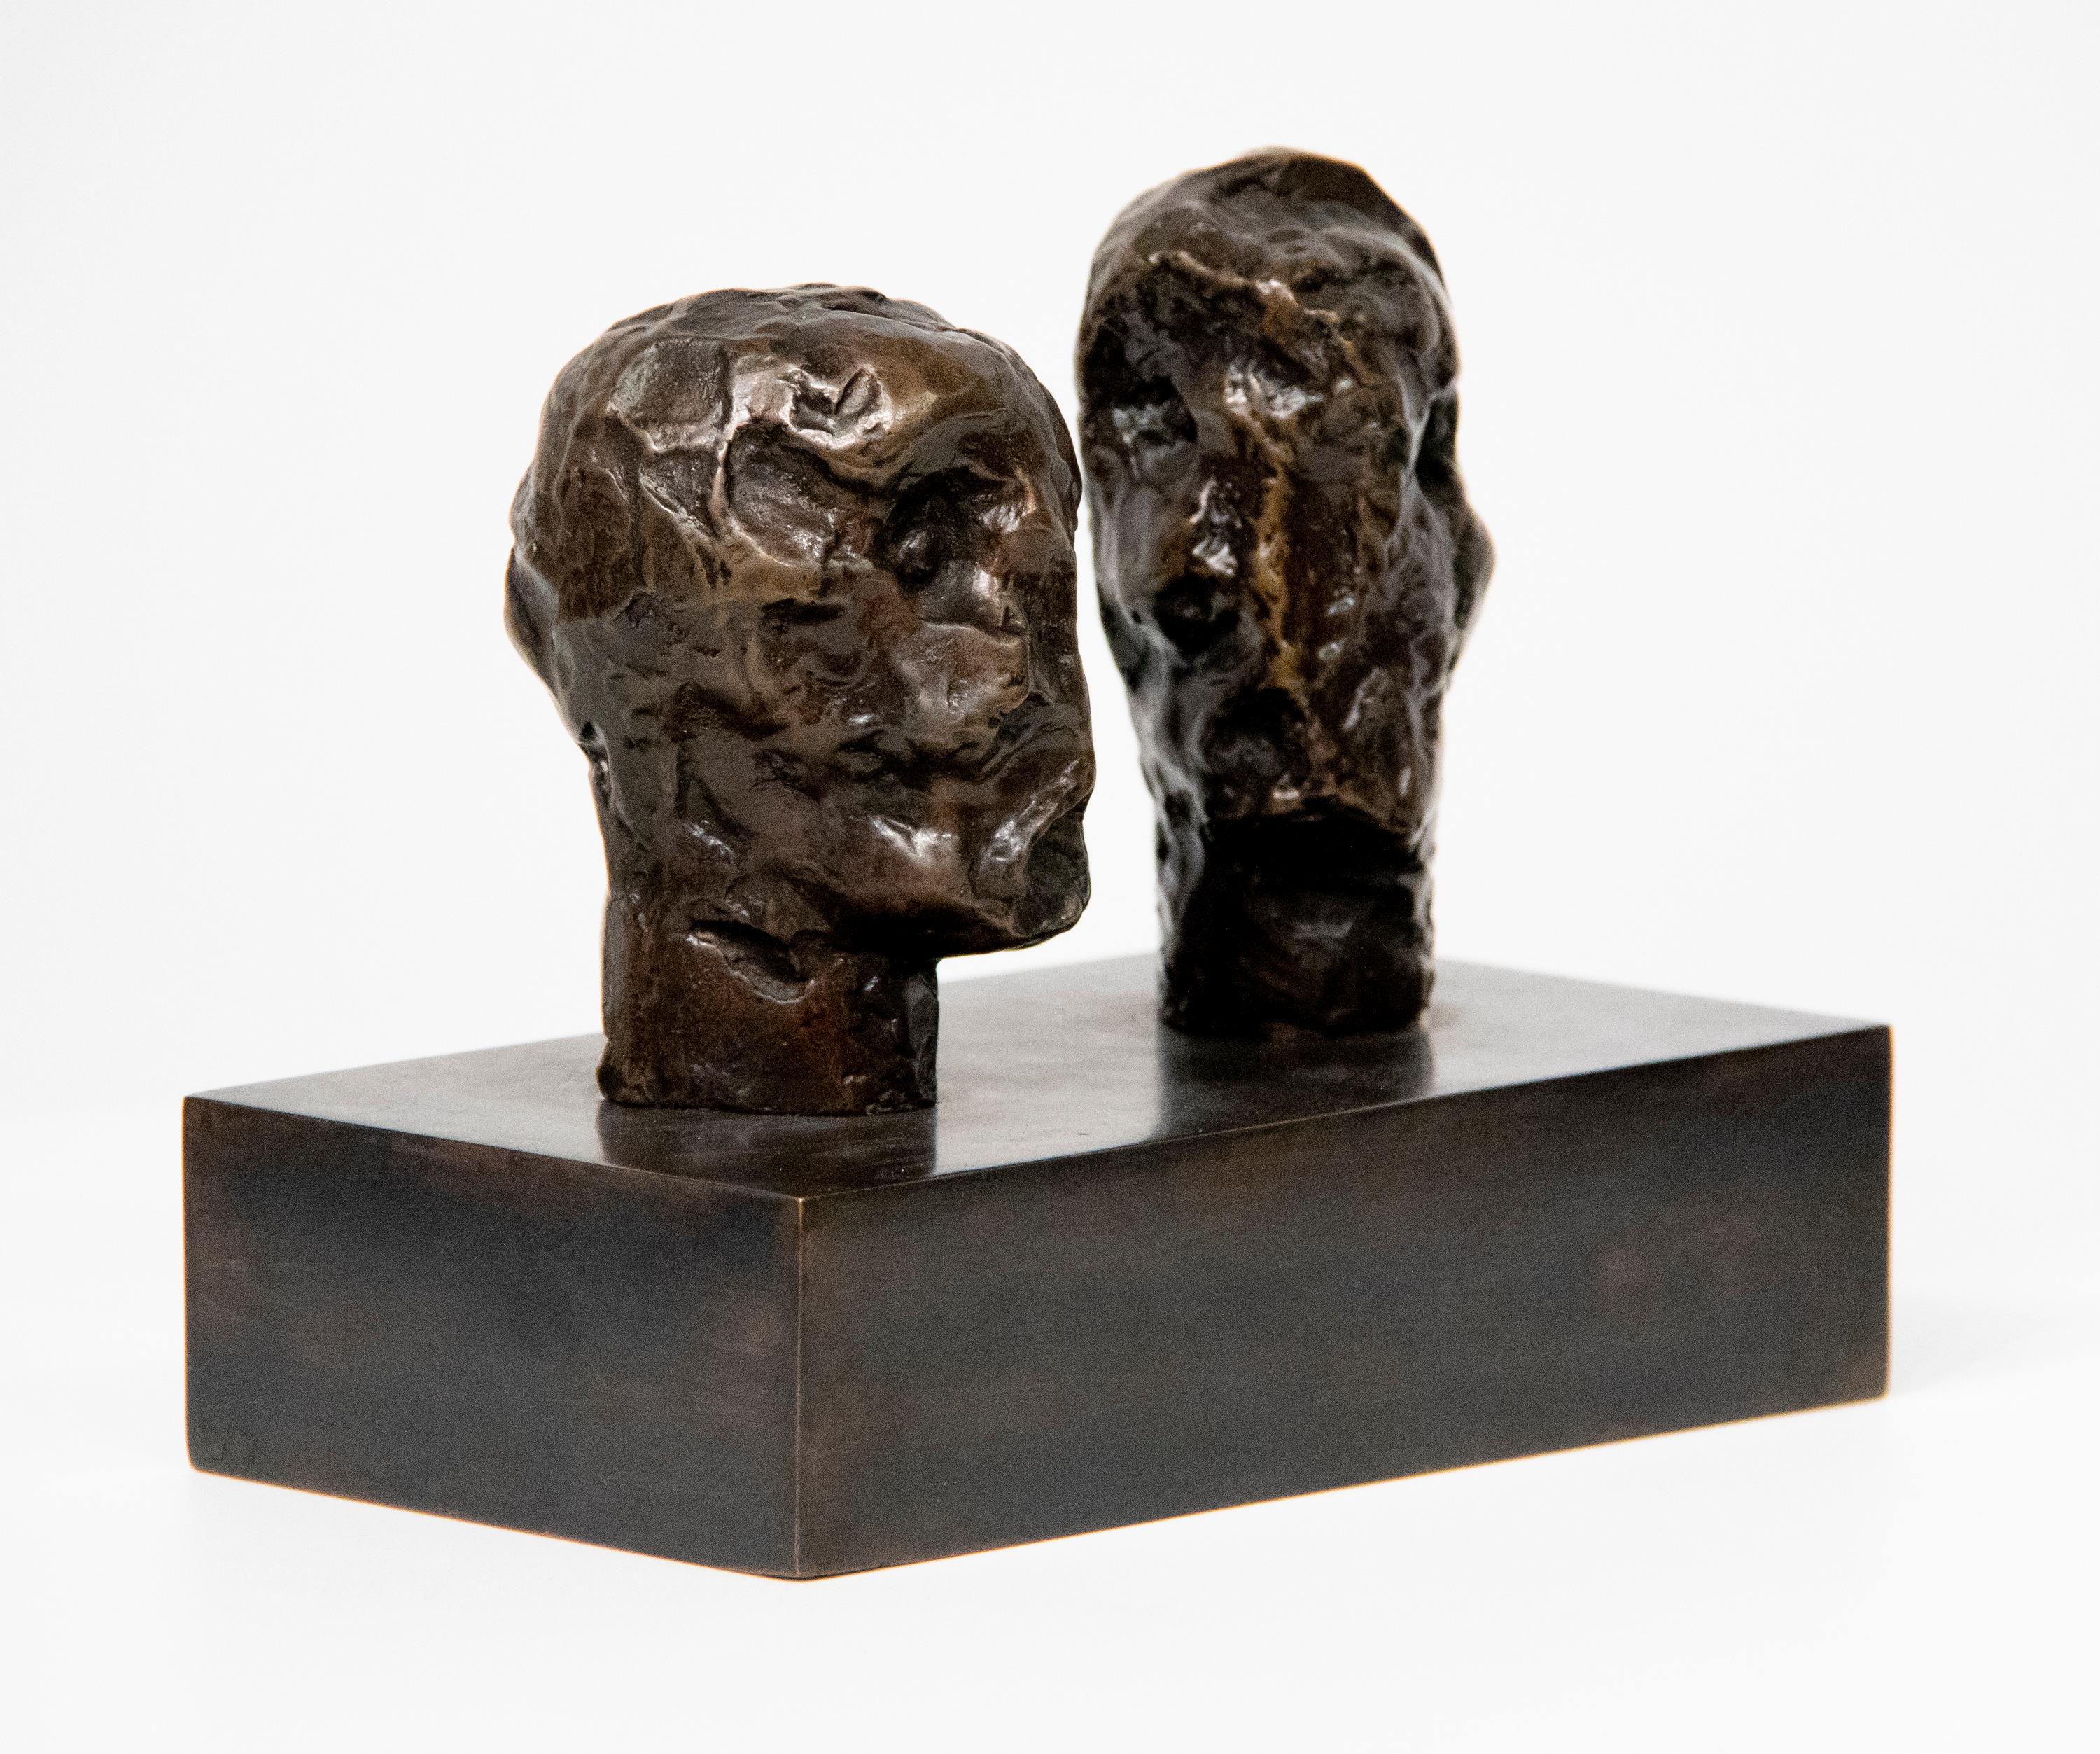 Emperor's Heads - Sculpture by Henry Moore